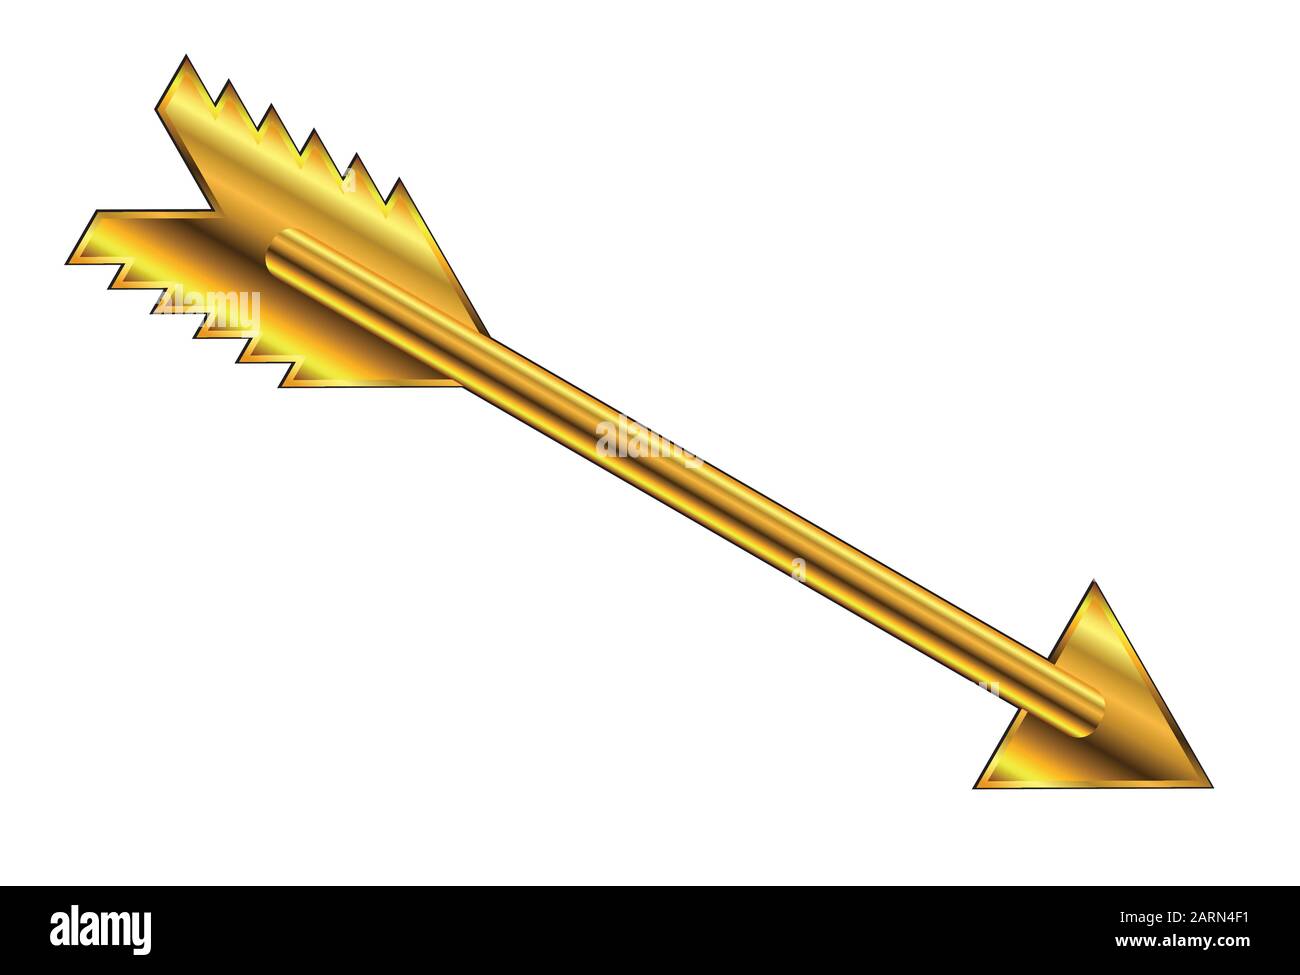 The Golden Arrow Isolated Over A White Background Stock Vector Image Art Alamy